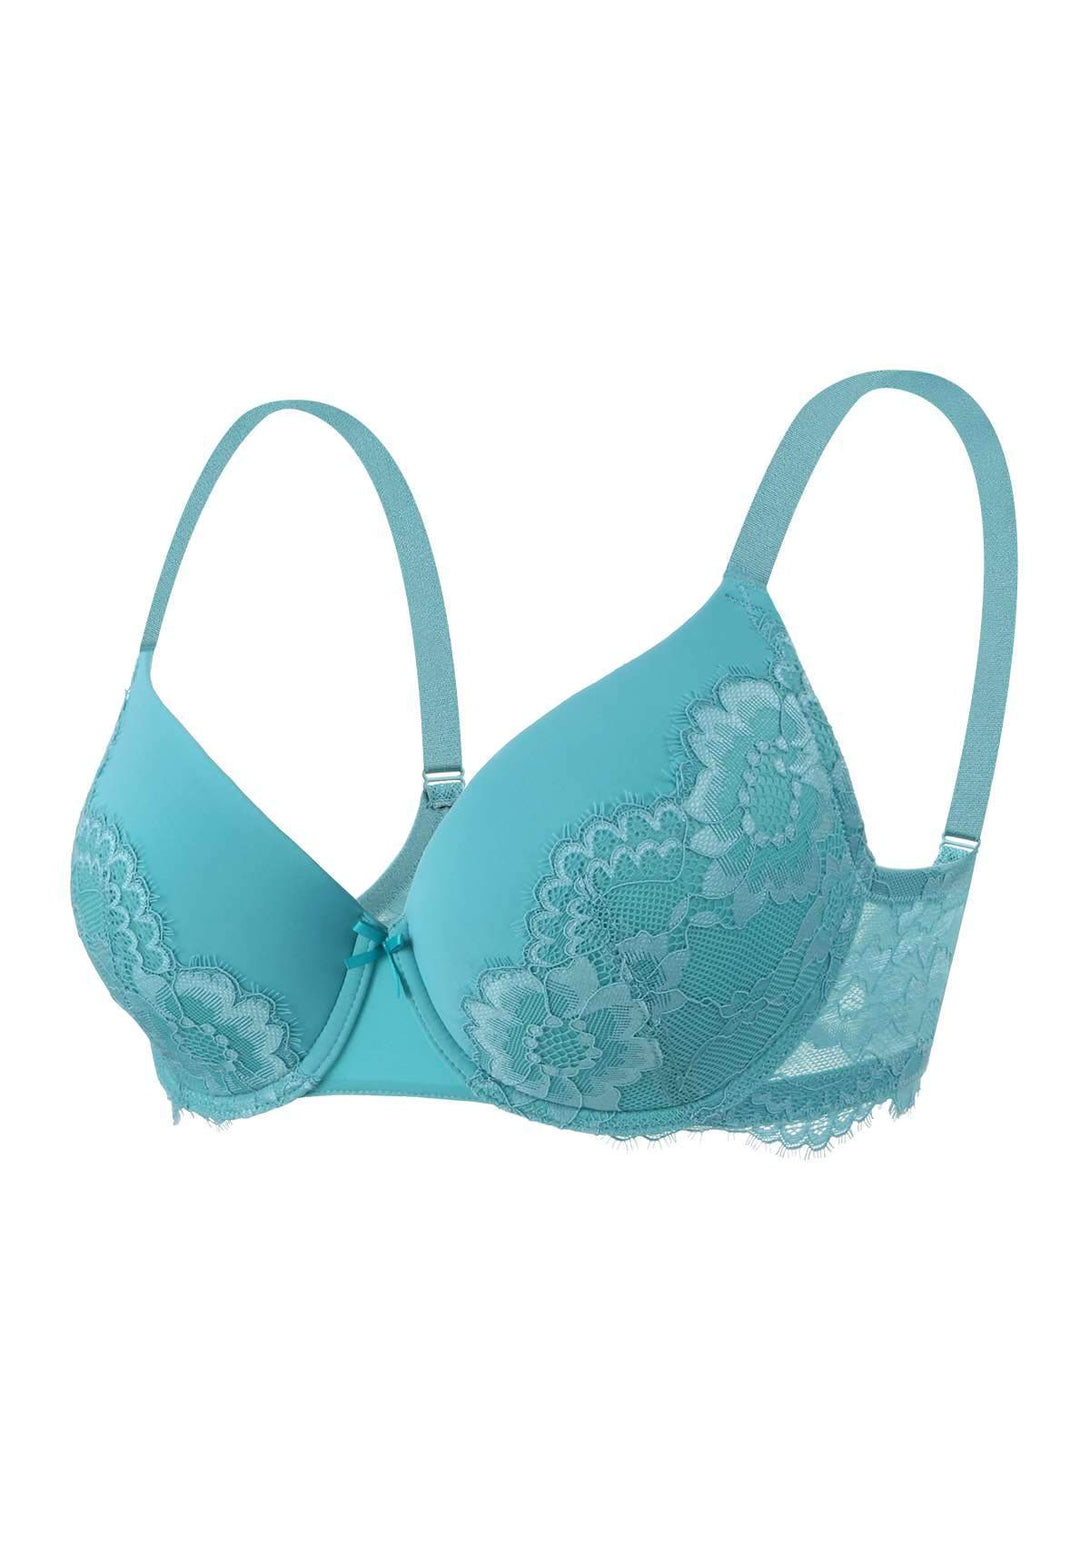 Buy Ishmita White Color Assorted Comfortable Bra Size:30, 32, 34, 36 (32)  at